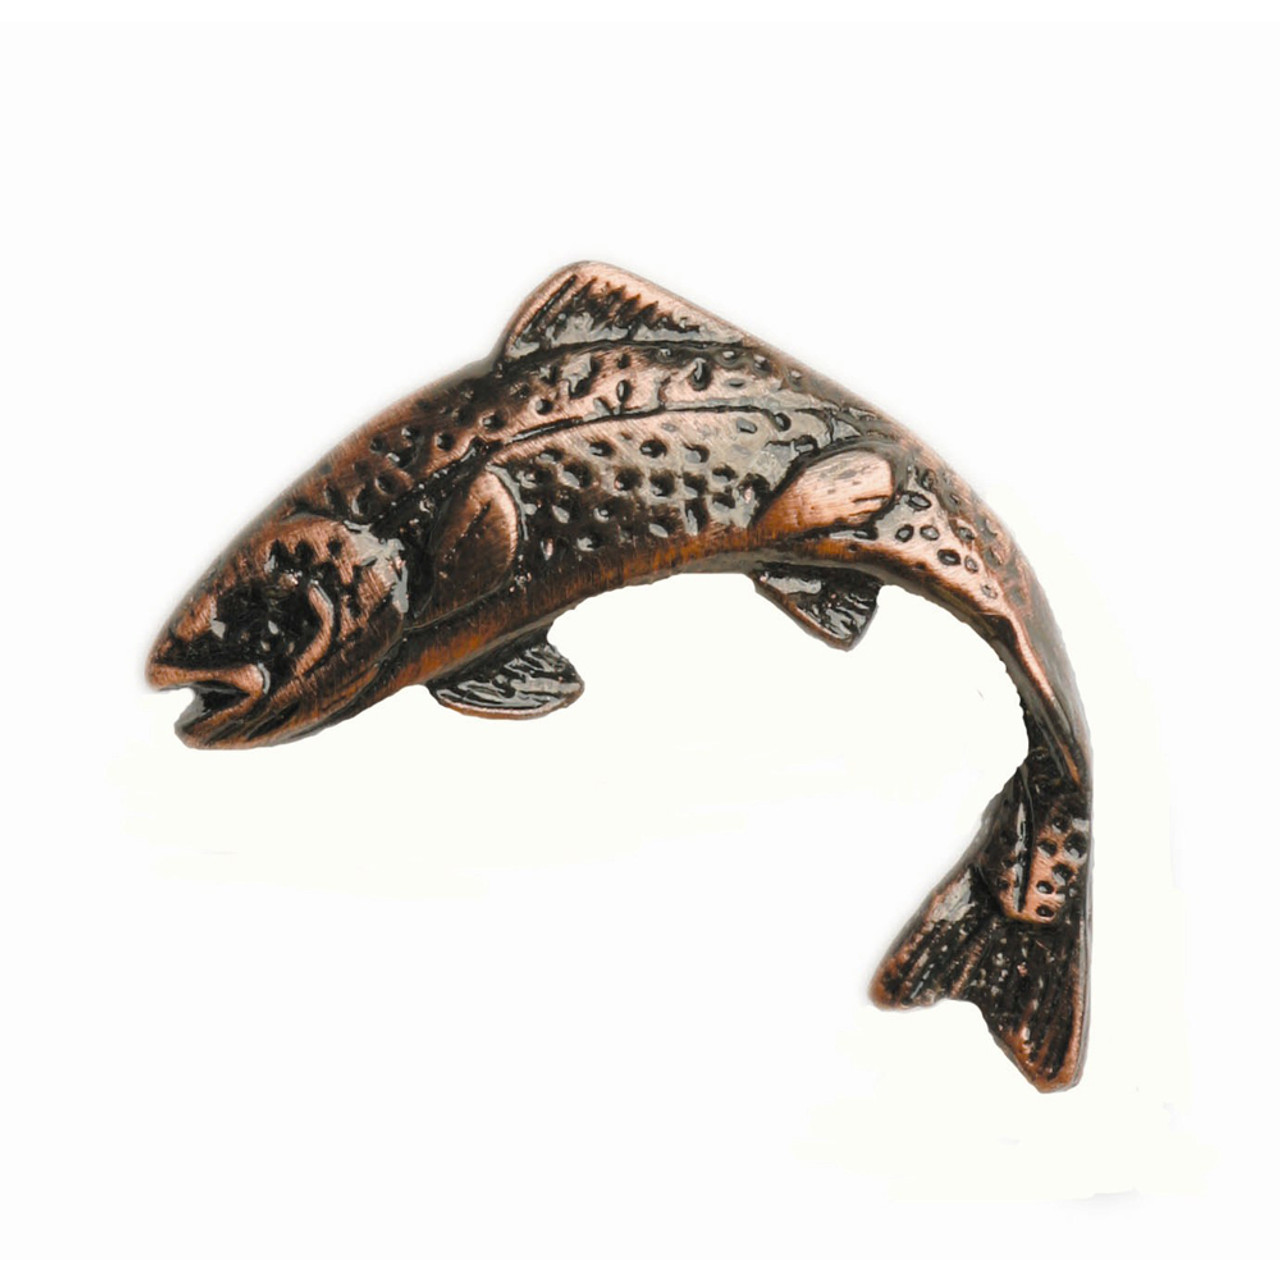 Trout Cabinet Knobs - Set of 2 - Nickel Finish - 2 1/2W x 2H from Black Forest Decor